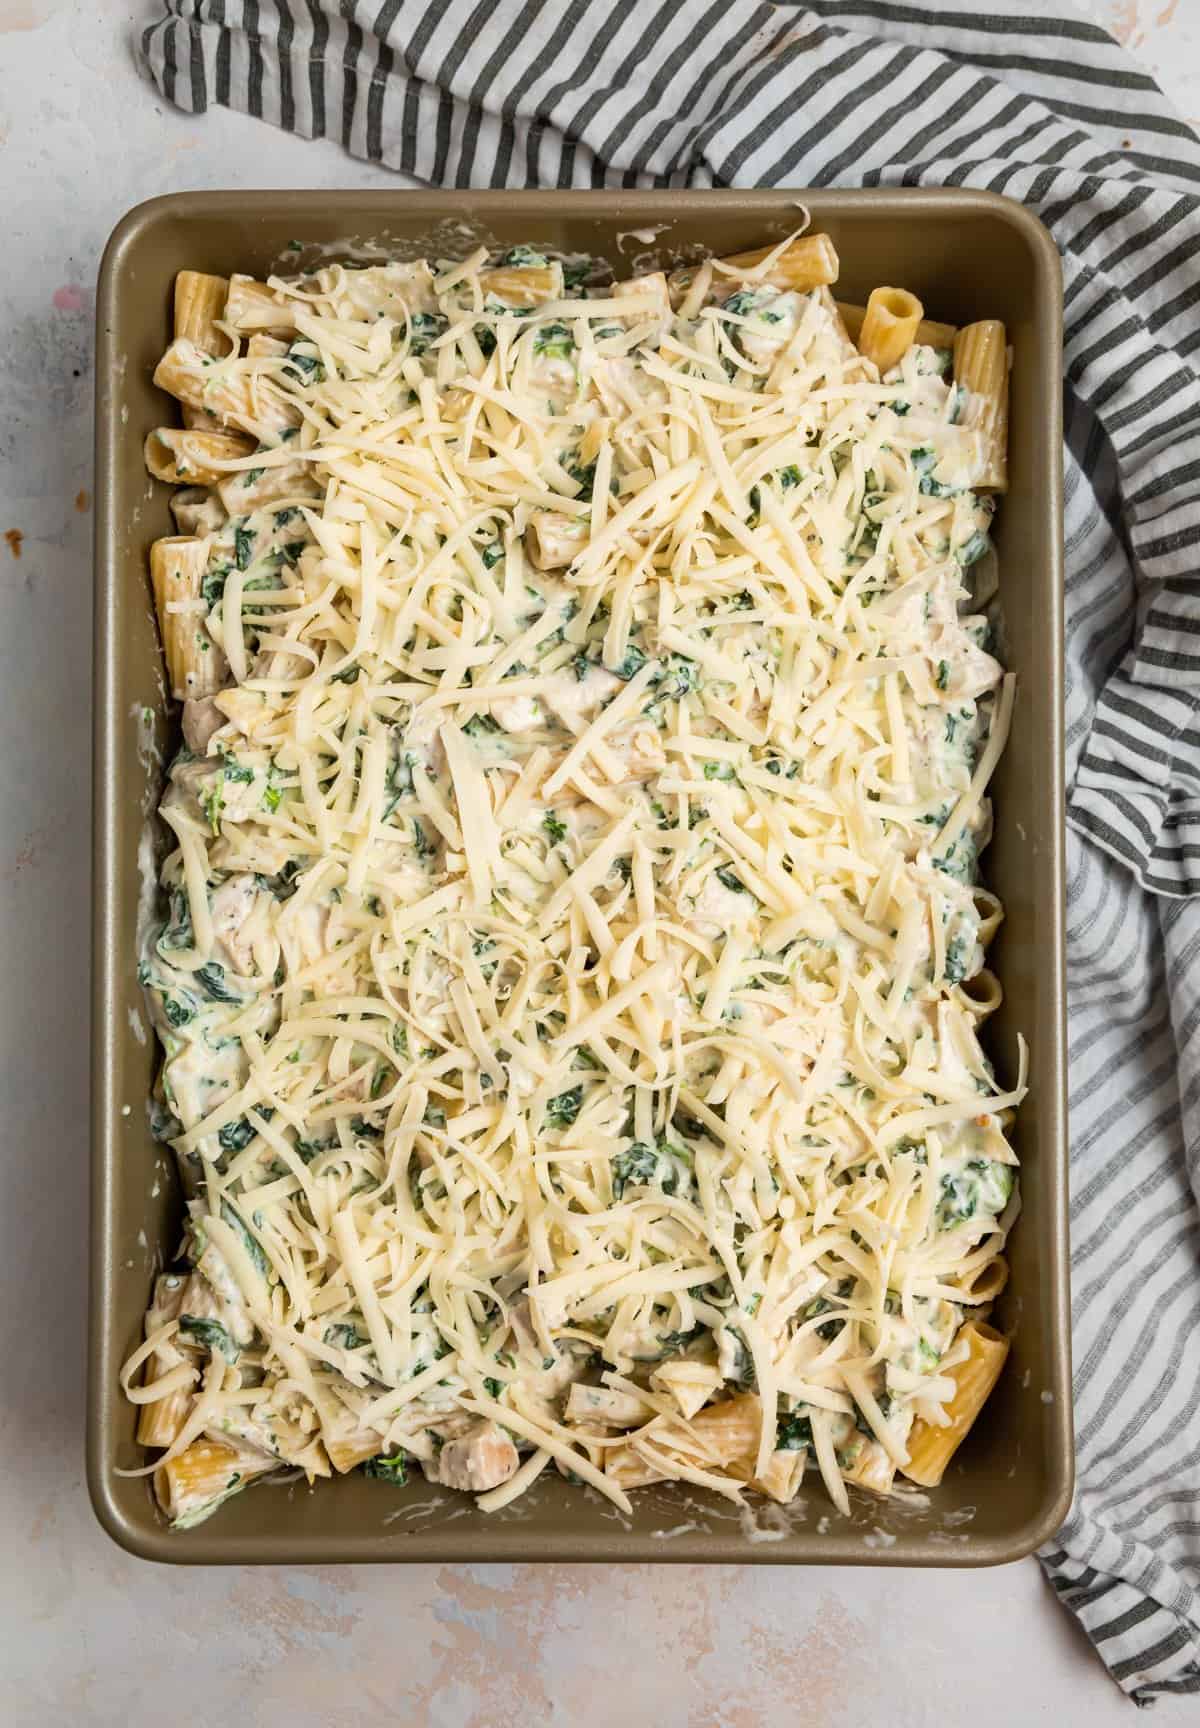 Casserole dish with shredded cheese on top.